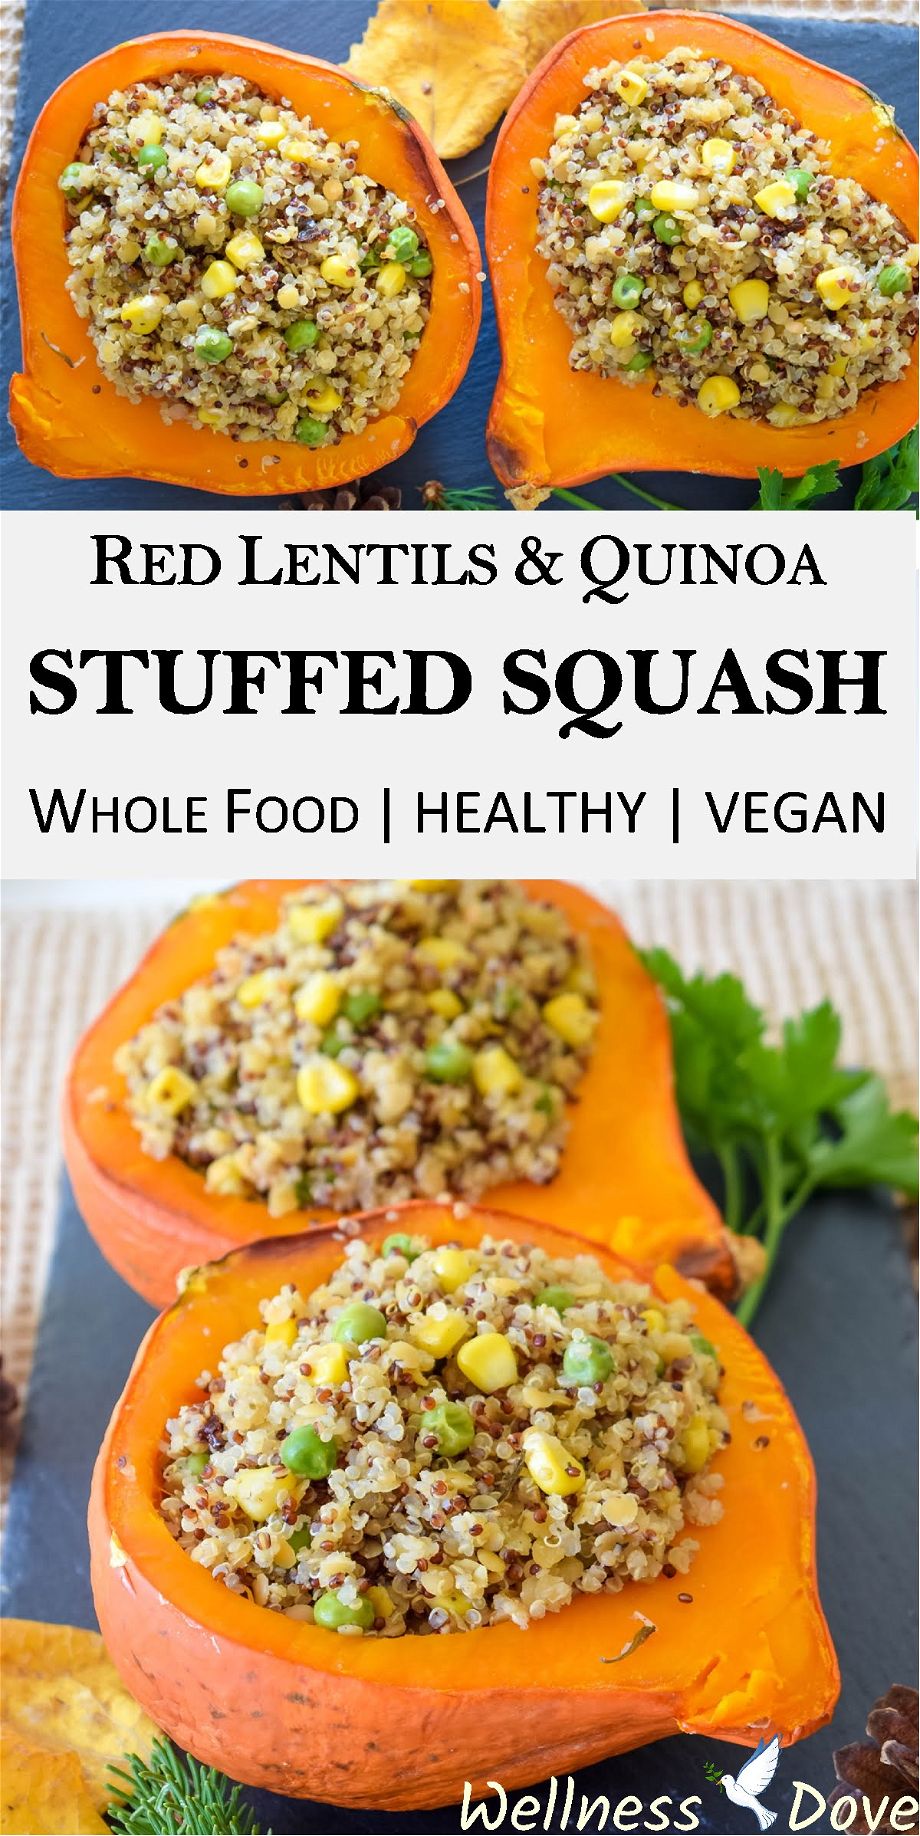 A delicious and easy stuffed squash recipe!Only whole plant food ingredients, without any oil for superb health and weight.The rich, sweet flavor of the squash pairs perfectly with the slightly sour taste of the sun-dried tomatoes. A surprising and really tasty combination, really satiating with the quinoa.